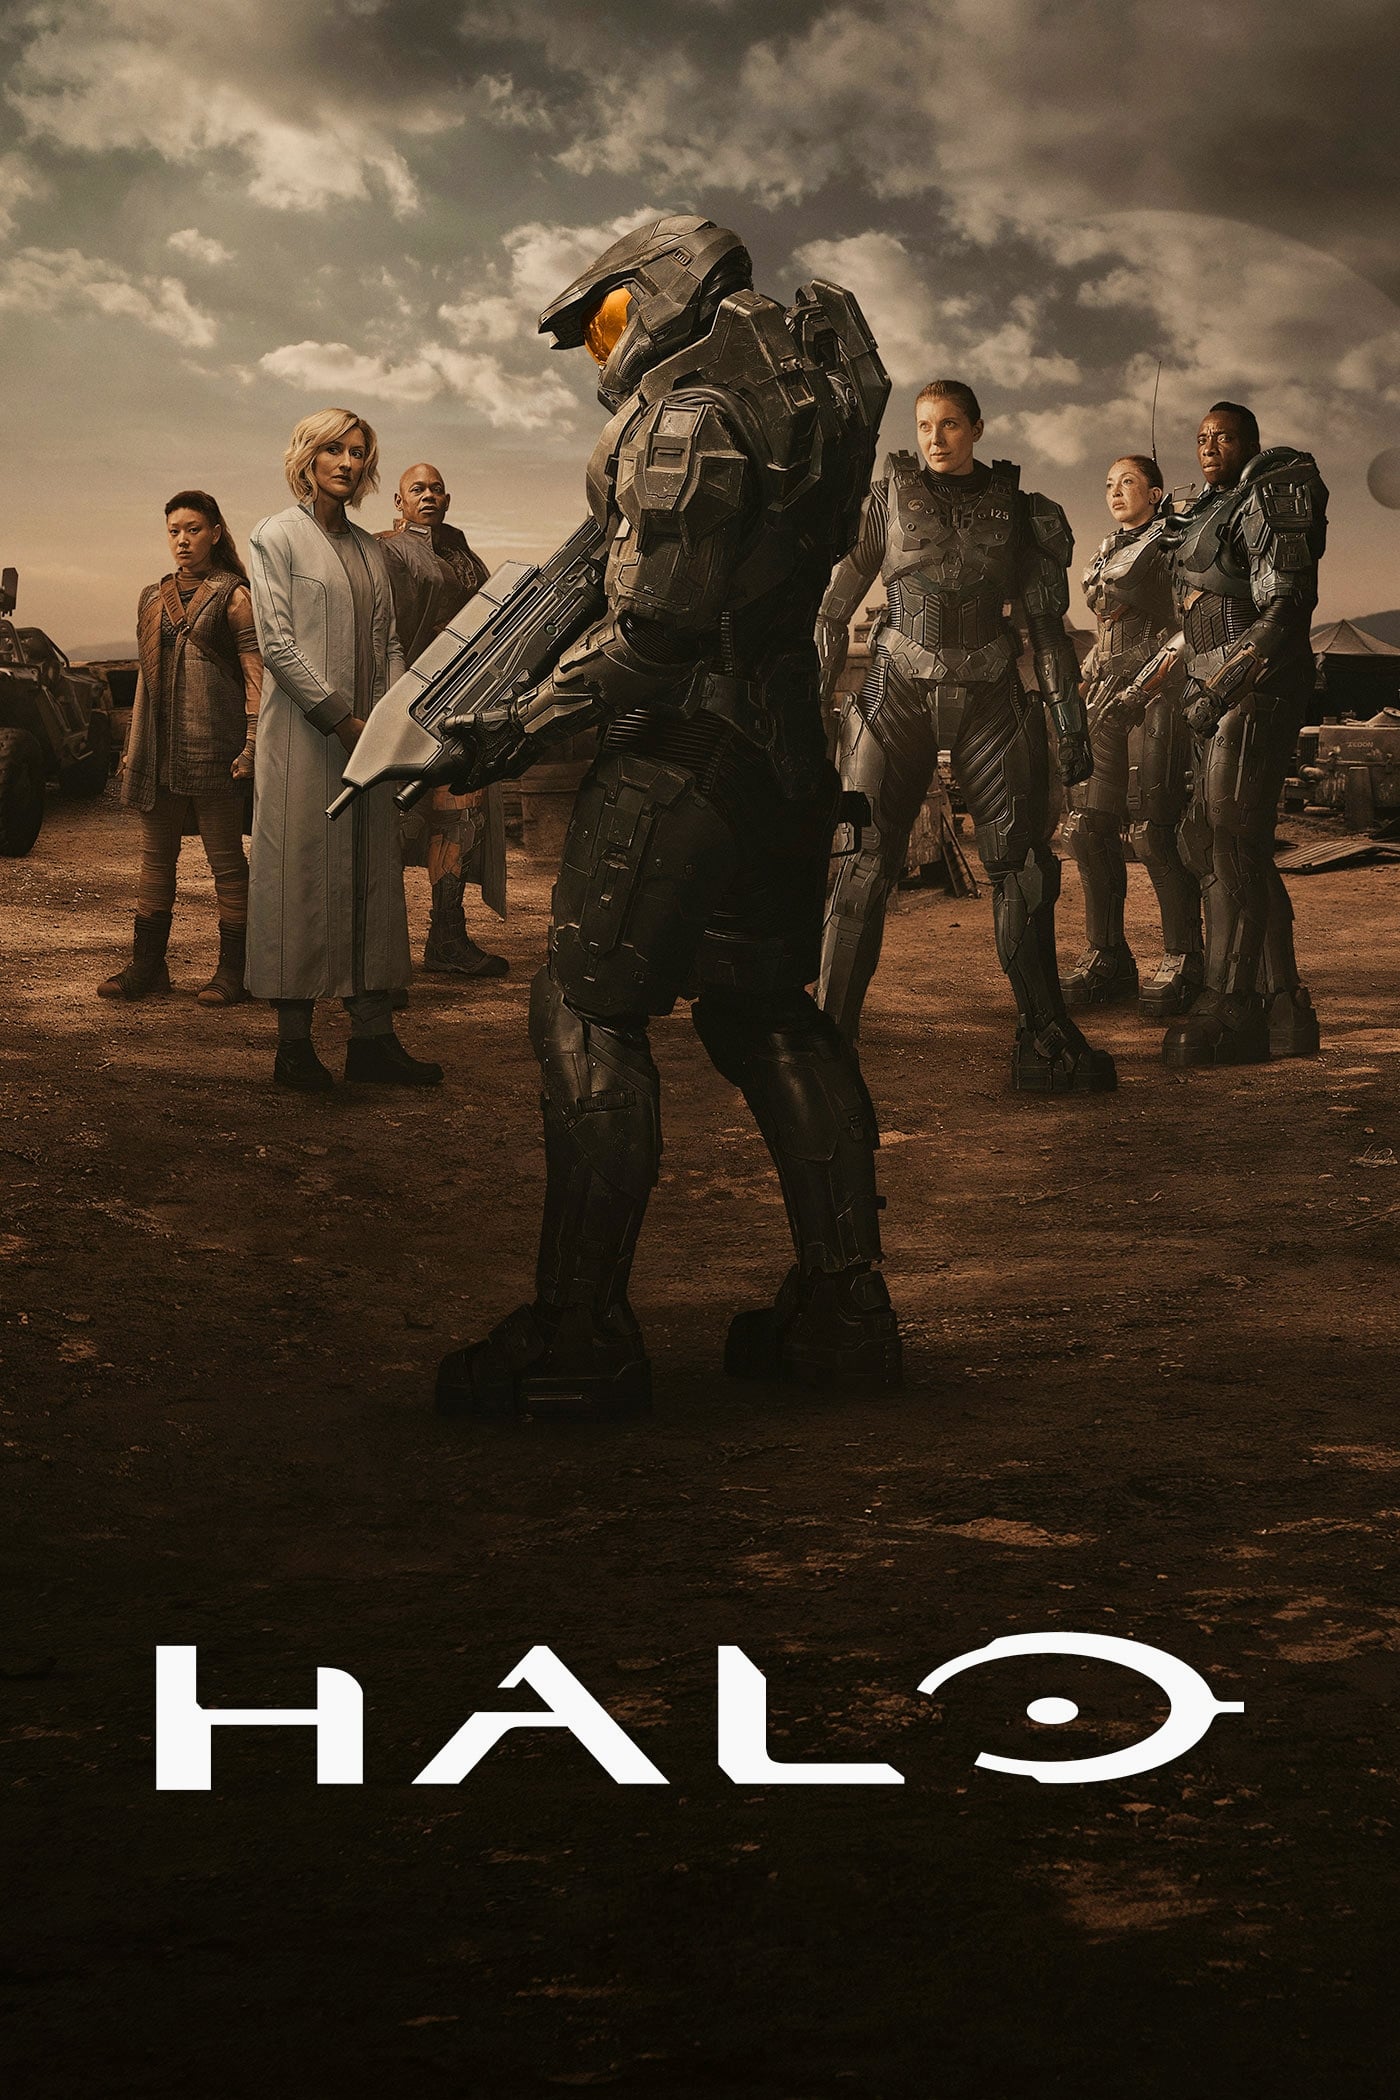 Halo TV Shows About Based On Video Game